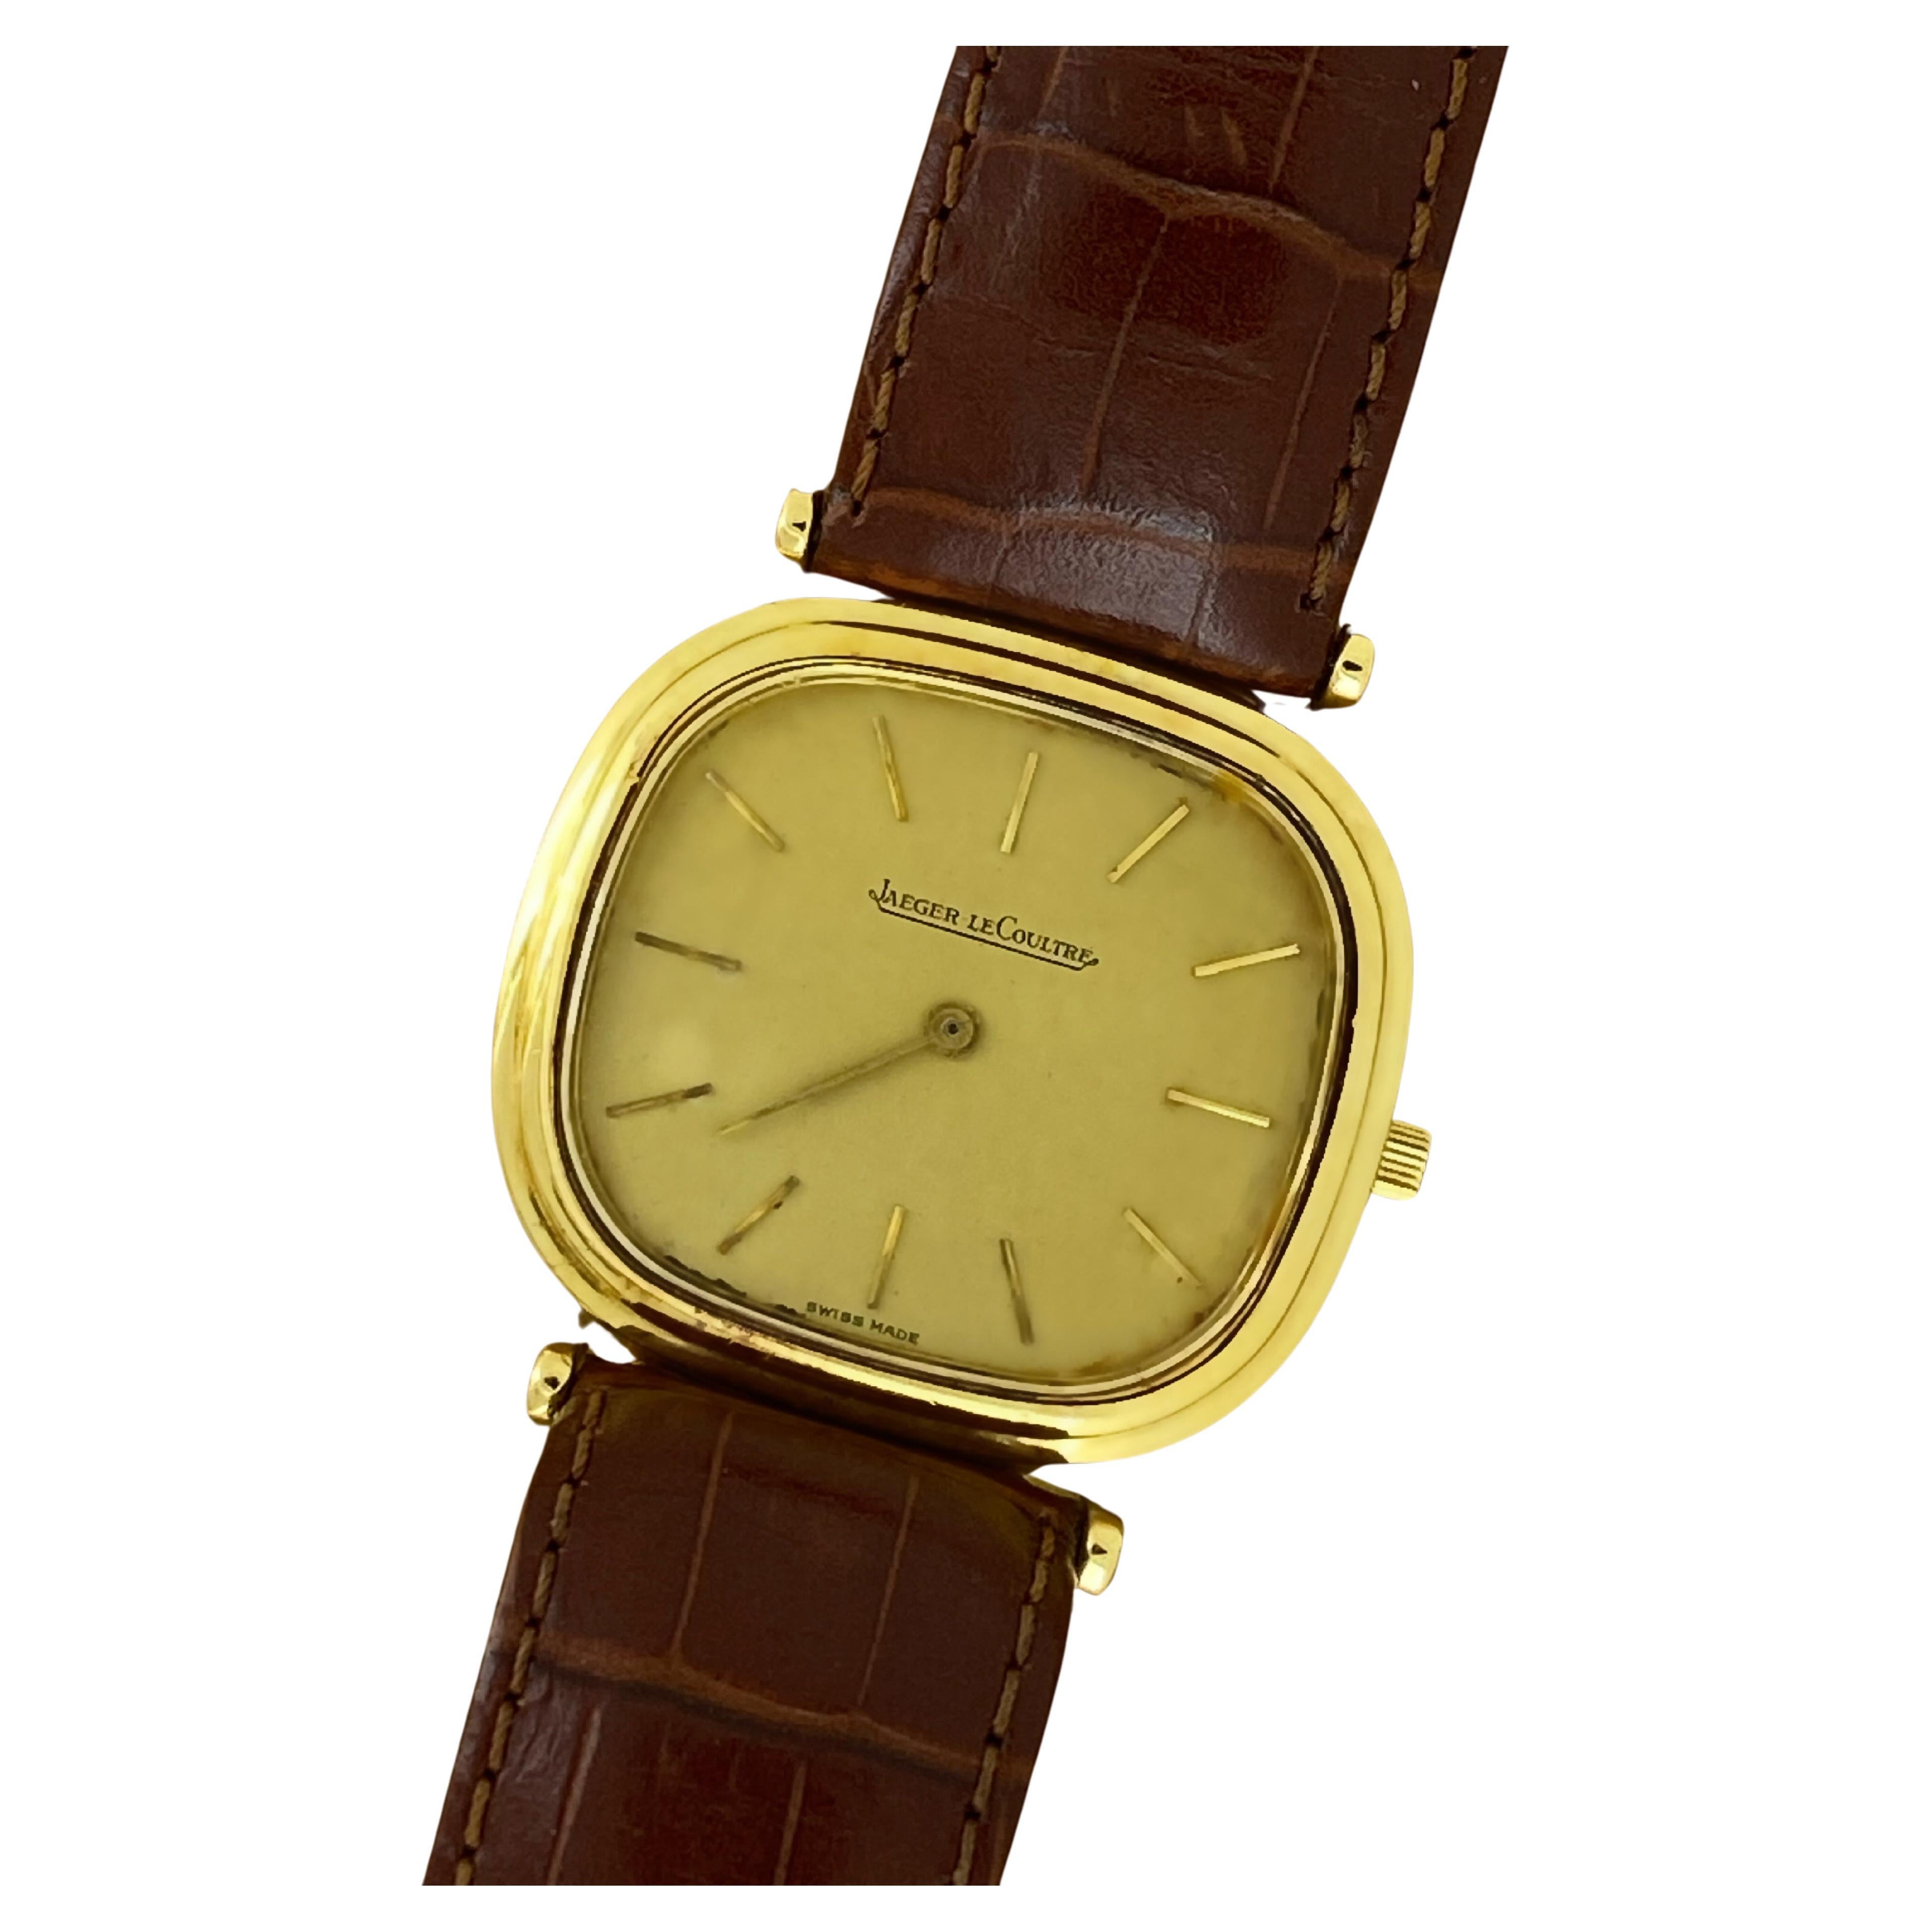 18K Gold Jaeger Le-Coultre ref 9132 Cushion Case Manual 17 jewels Cal 818 Watch For Sale